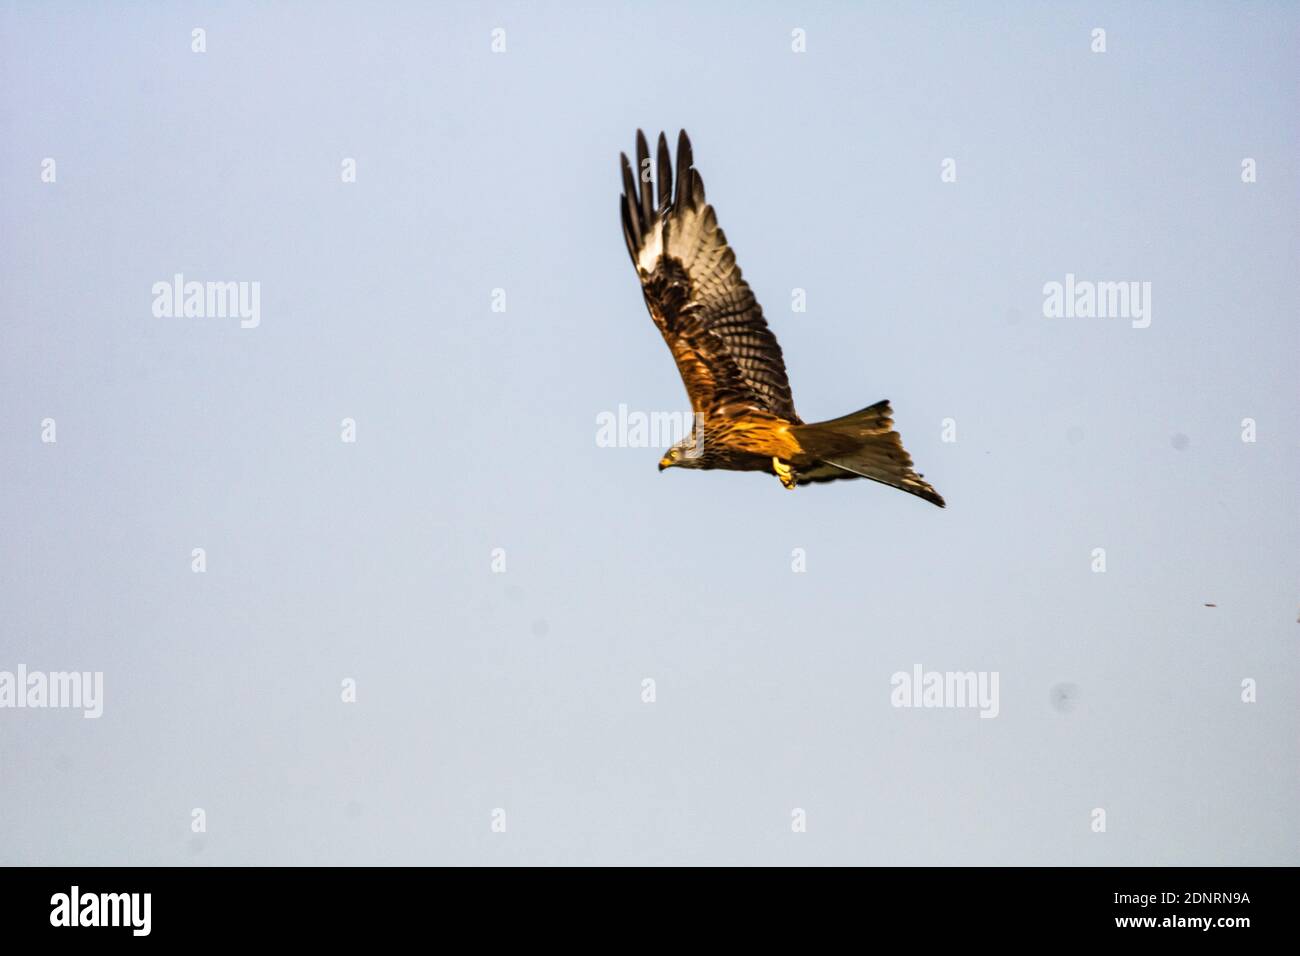 Low Angle View Of Eagle Flying In Sky Stock Photo